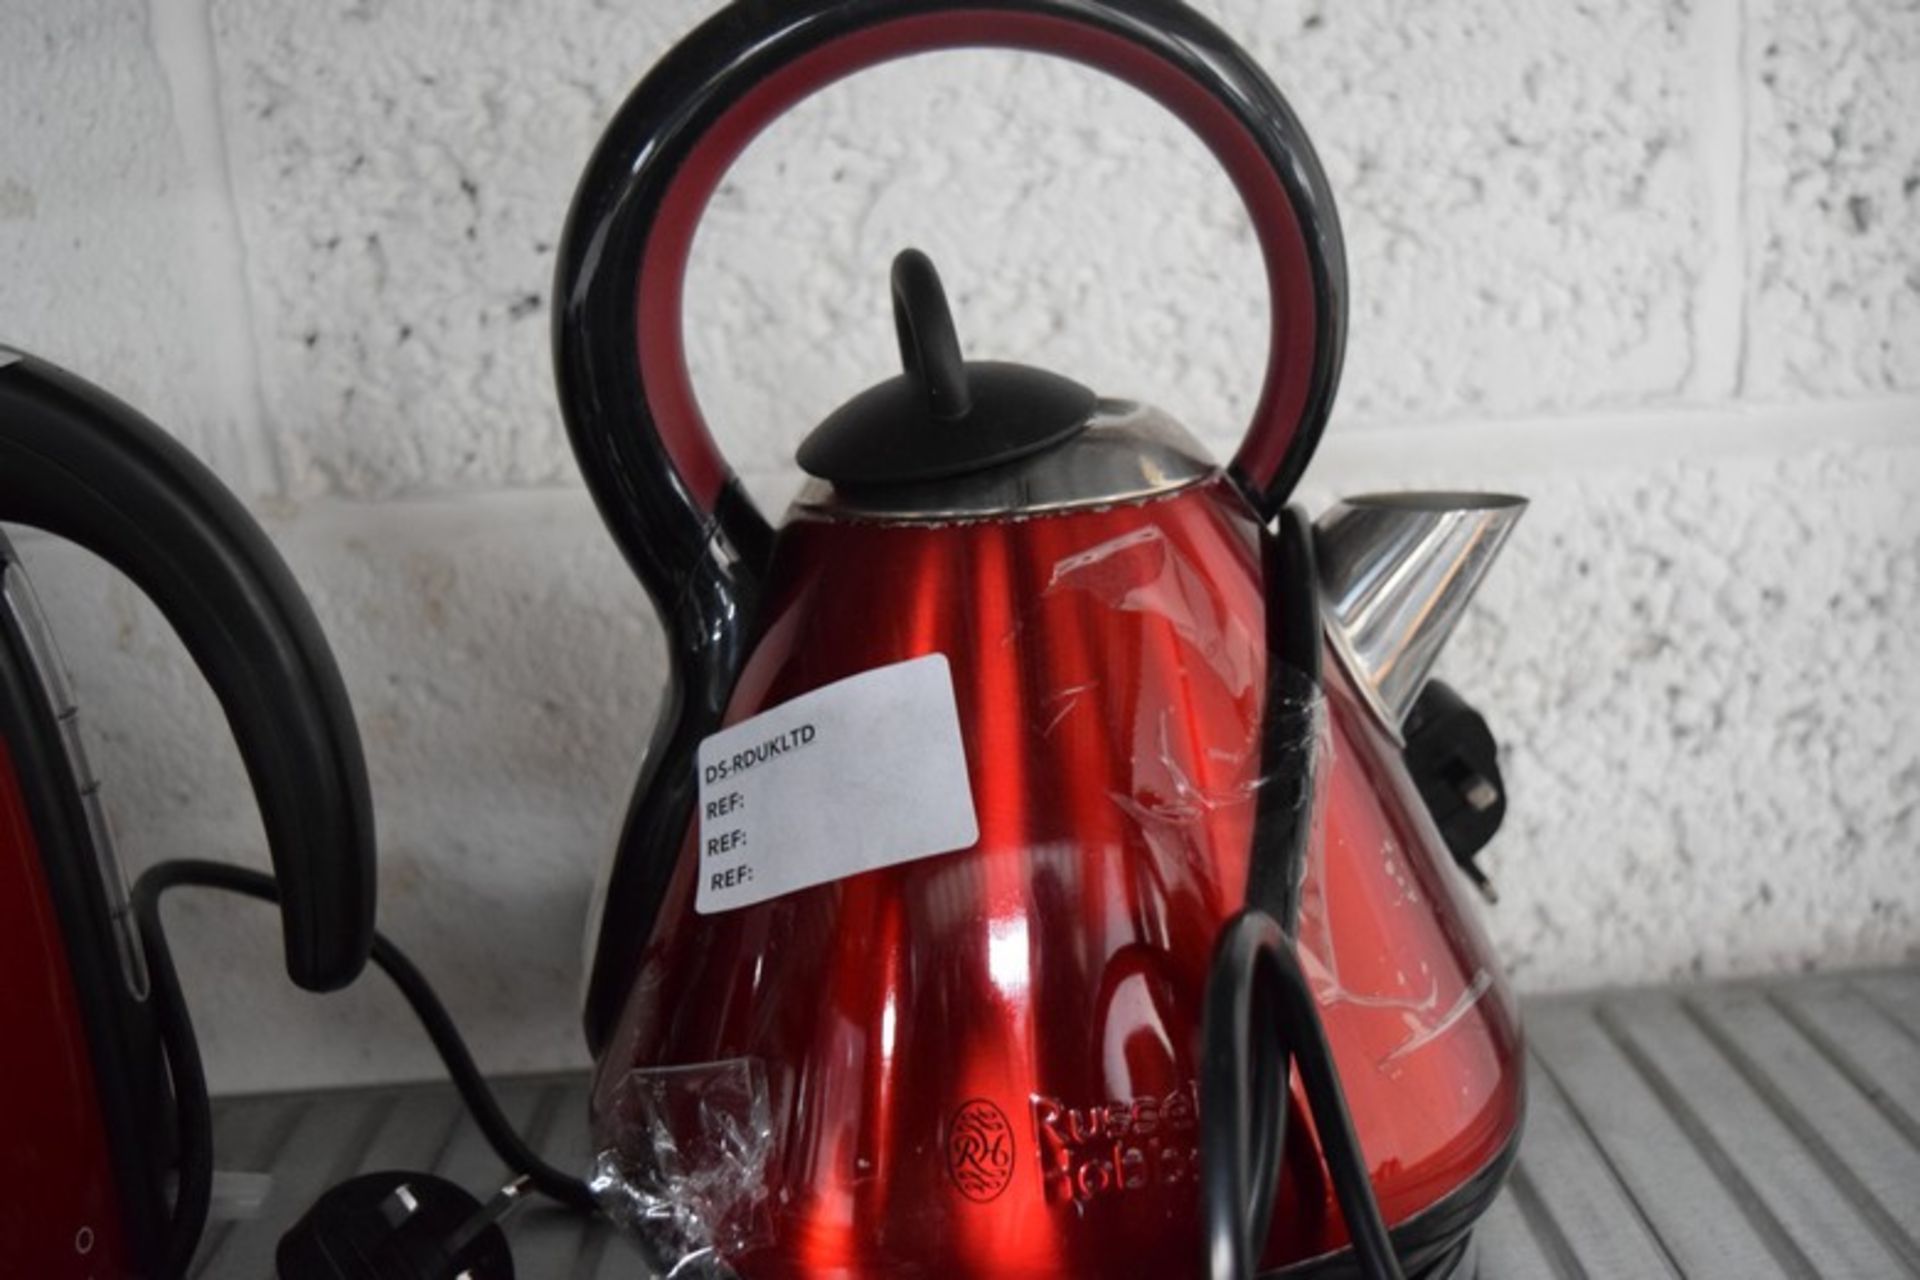 1 X UNBOXED RUSSELL HOBBS 1.5 LITRE CORDLESS JUG KETTLE IN RED